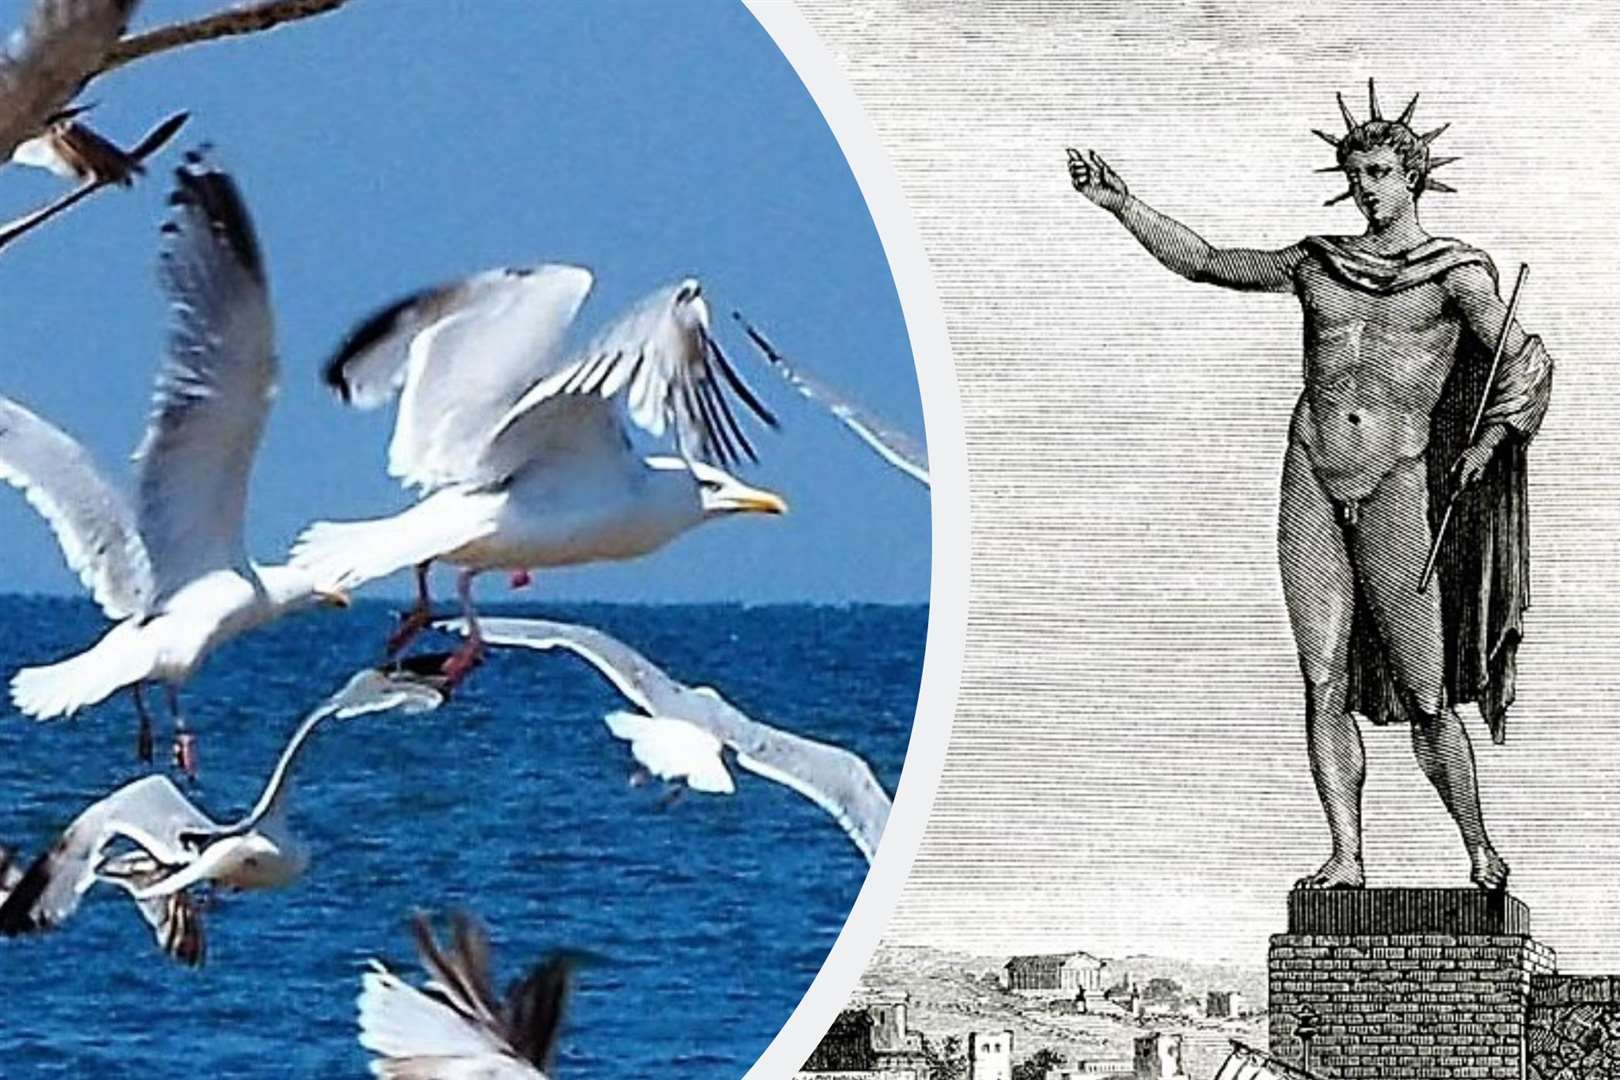 Plans for a giant statue in Dover modelled on the Colossus of Rhodes were scuppered by seagulls